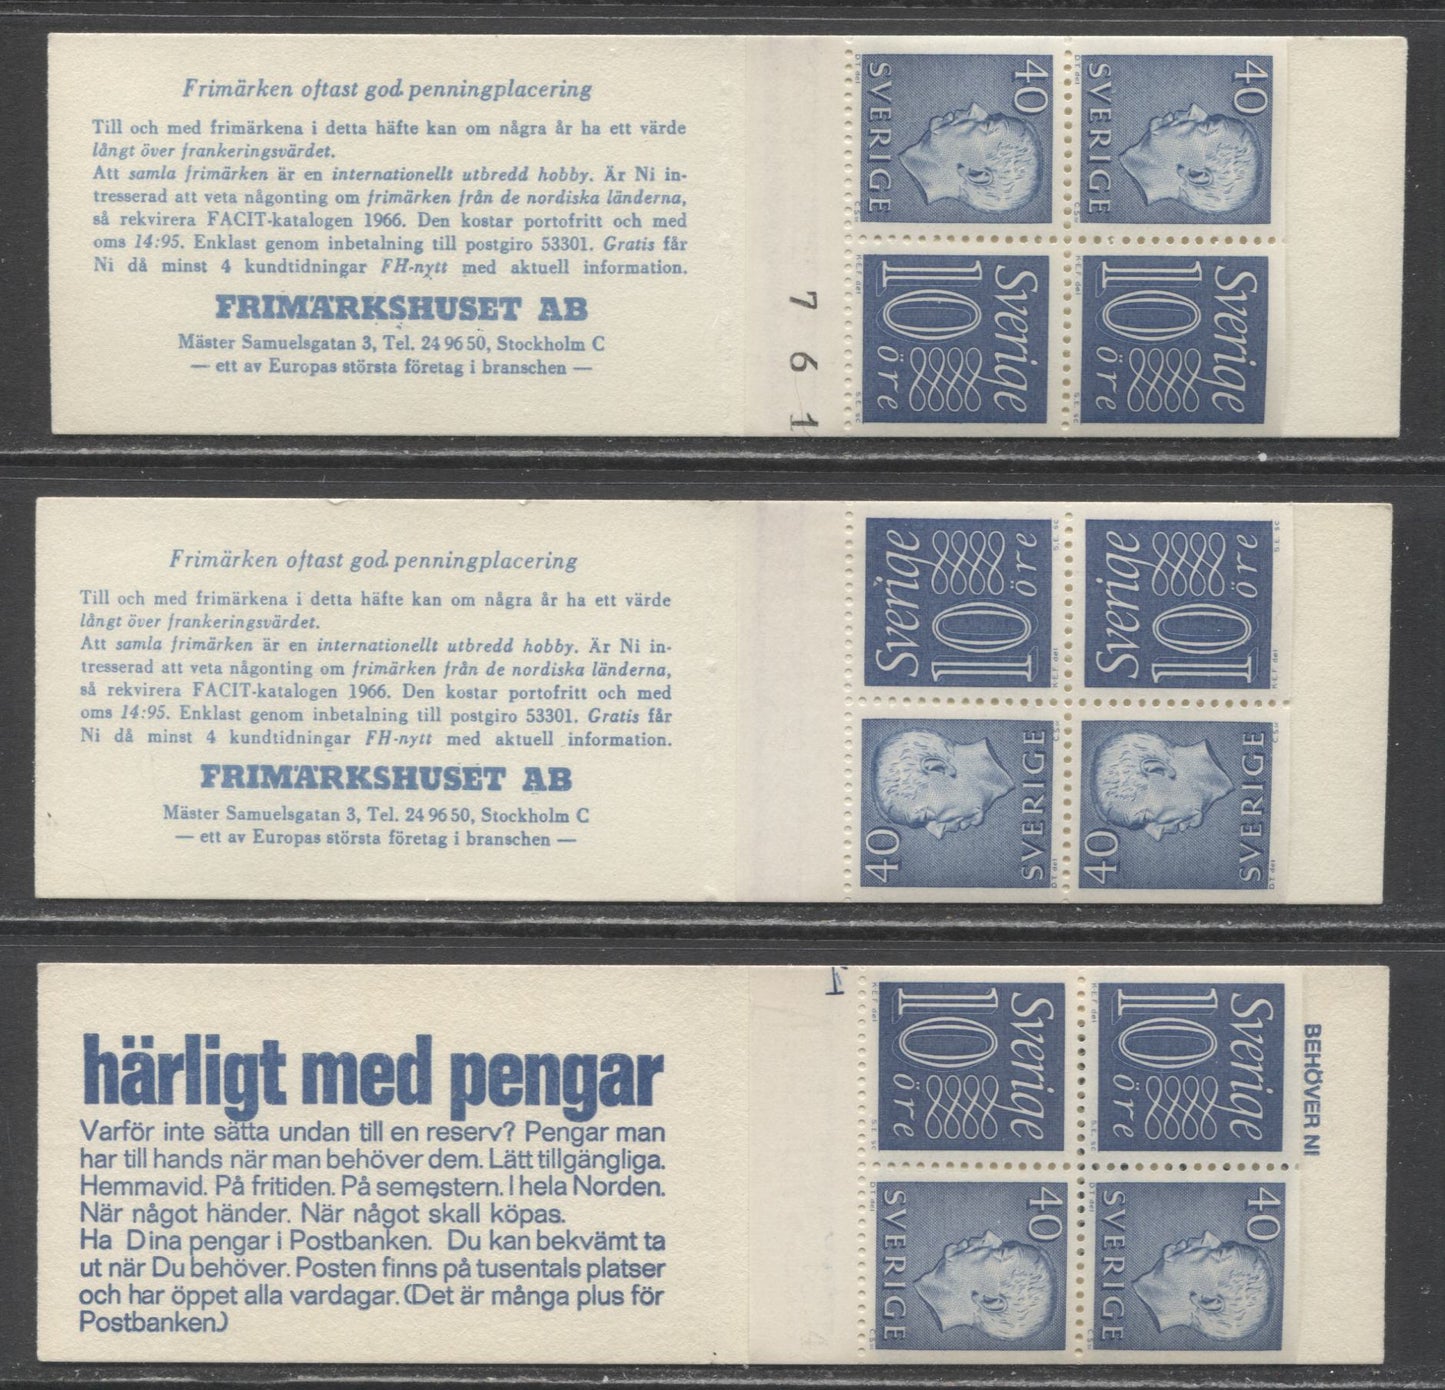 Lot 193 Sweden SC#669b (Facit #HA12ARV/HA12B1RV) 1964 King Gustav VI Adolf Definitive Issue, Different Back Cover Designs, Upright & Inverted Panes, 10 Ore Stamps At left and Right, Different Tab Markings, 3 VFNH Booklets of 4 (2+2),  Estimated Value $8